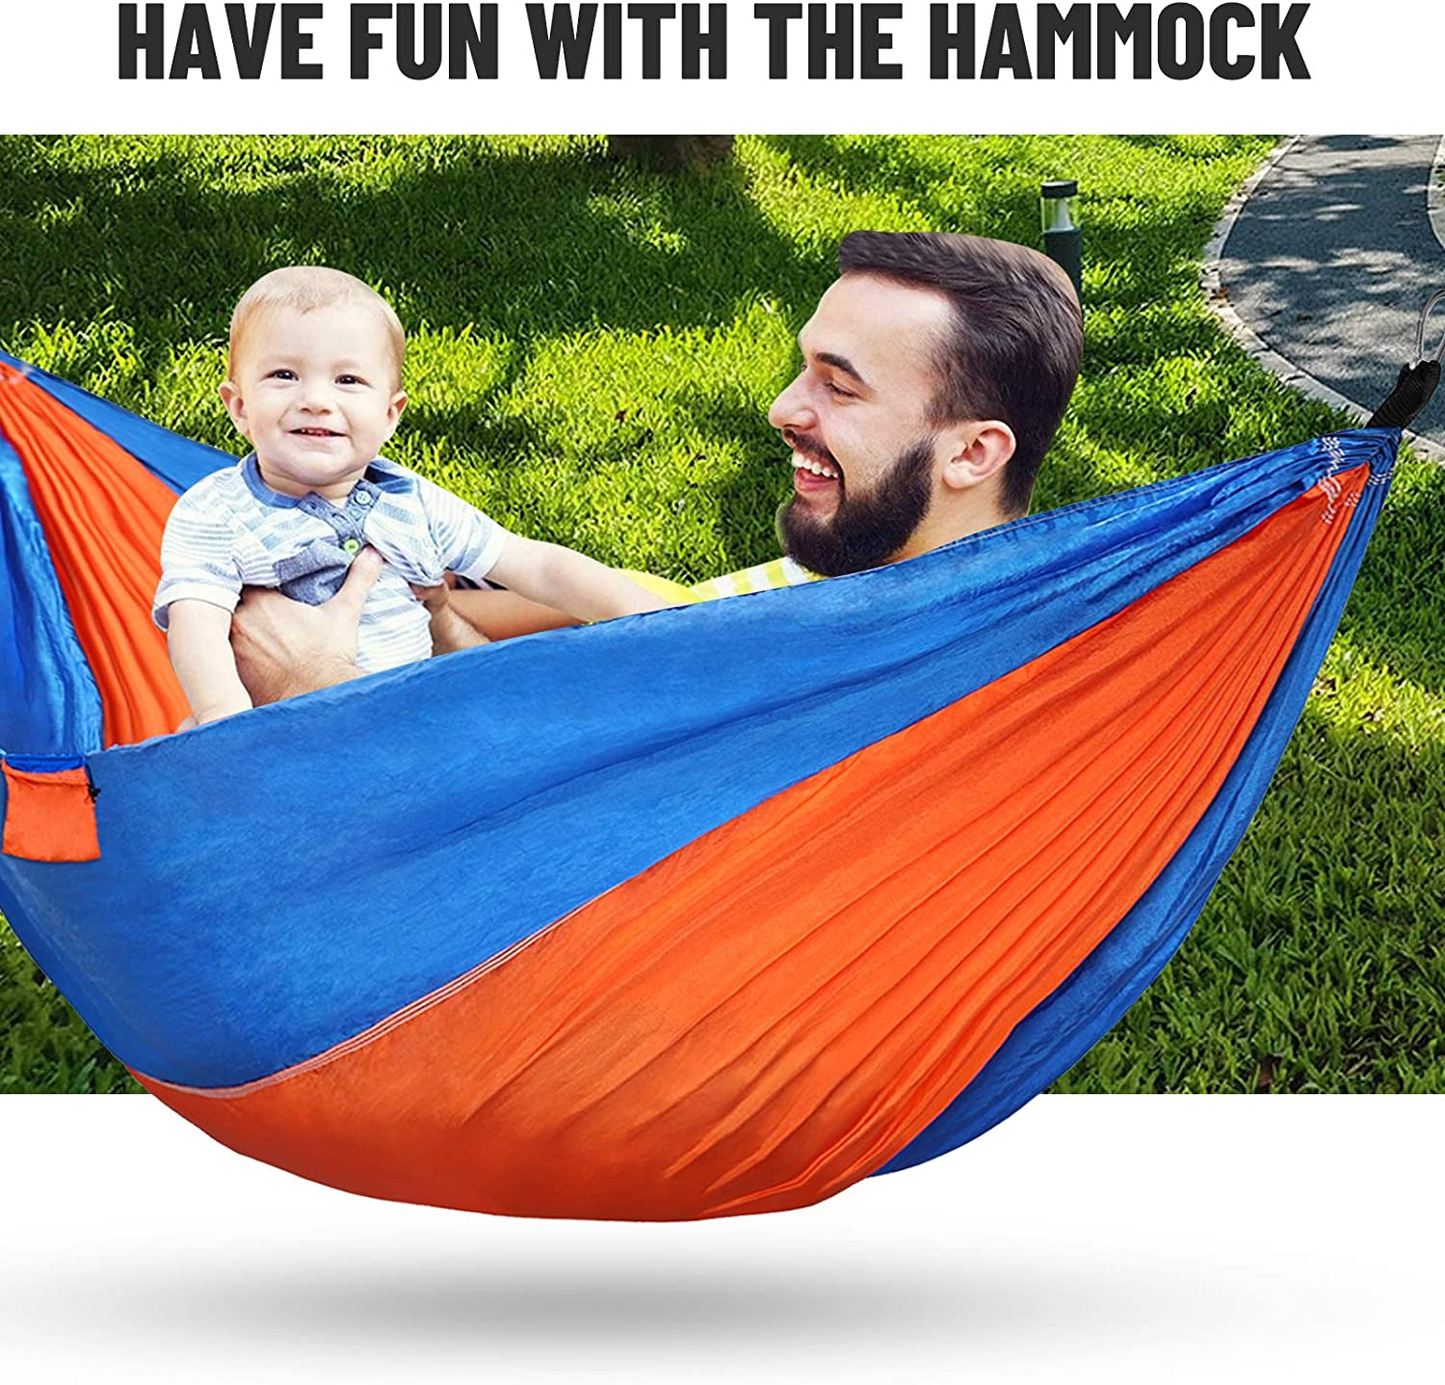 Hammock Camping with Hammock Tree Straps, Portable Outdoor Hammock for Backpacking Travelling Yard Beach